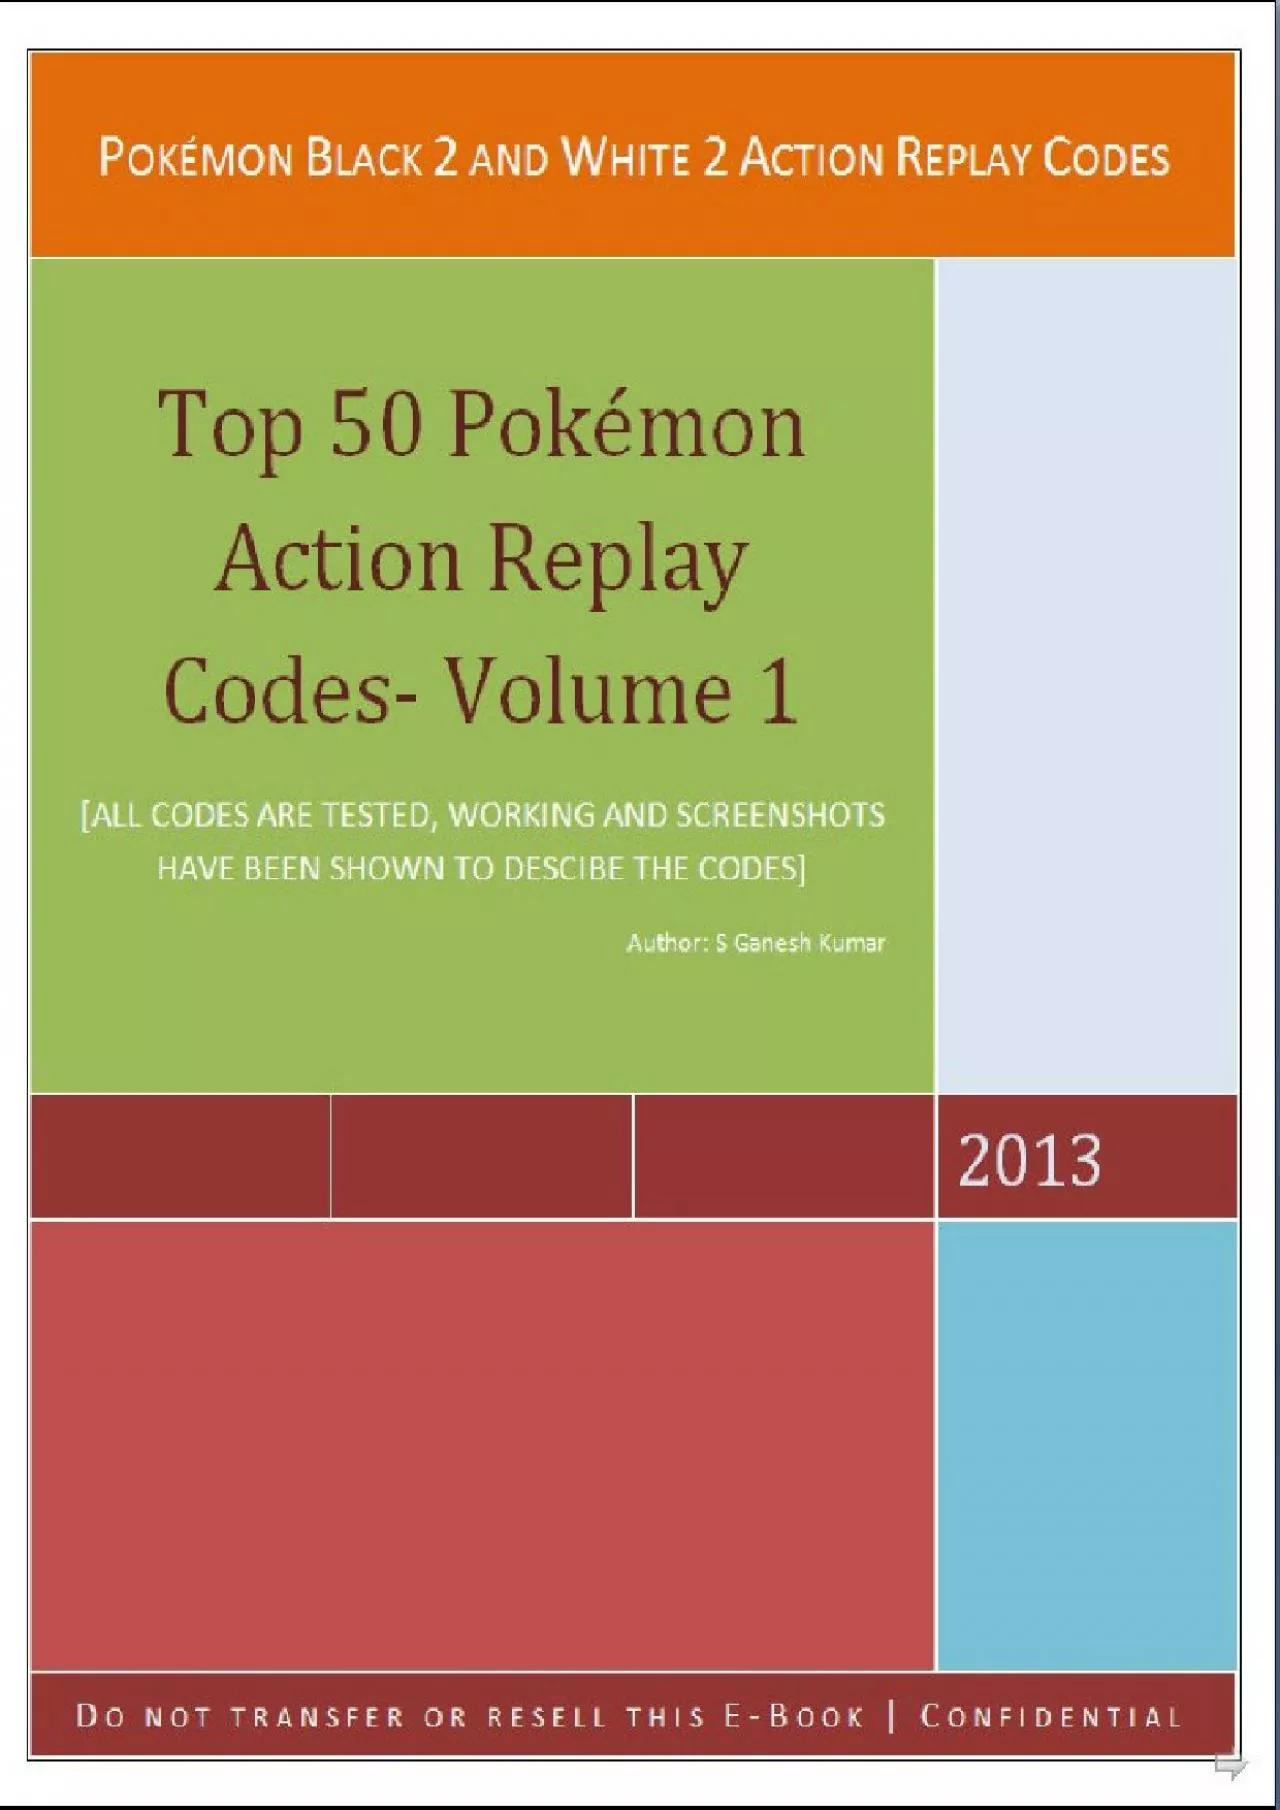 (DOWNLOAD)-Pokemon Black 2 and White 2 Action Replay Code (Top 50 pokemons Action Replay